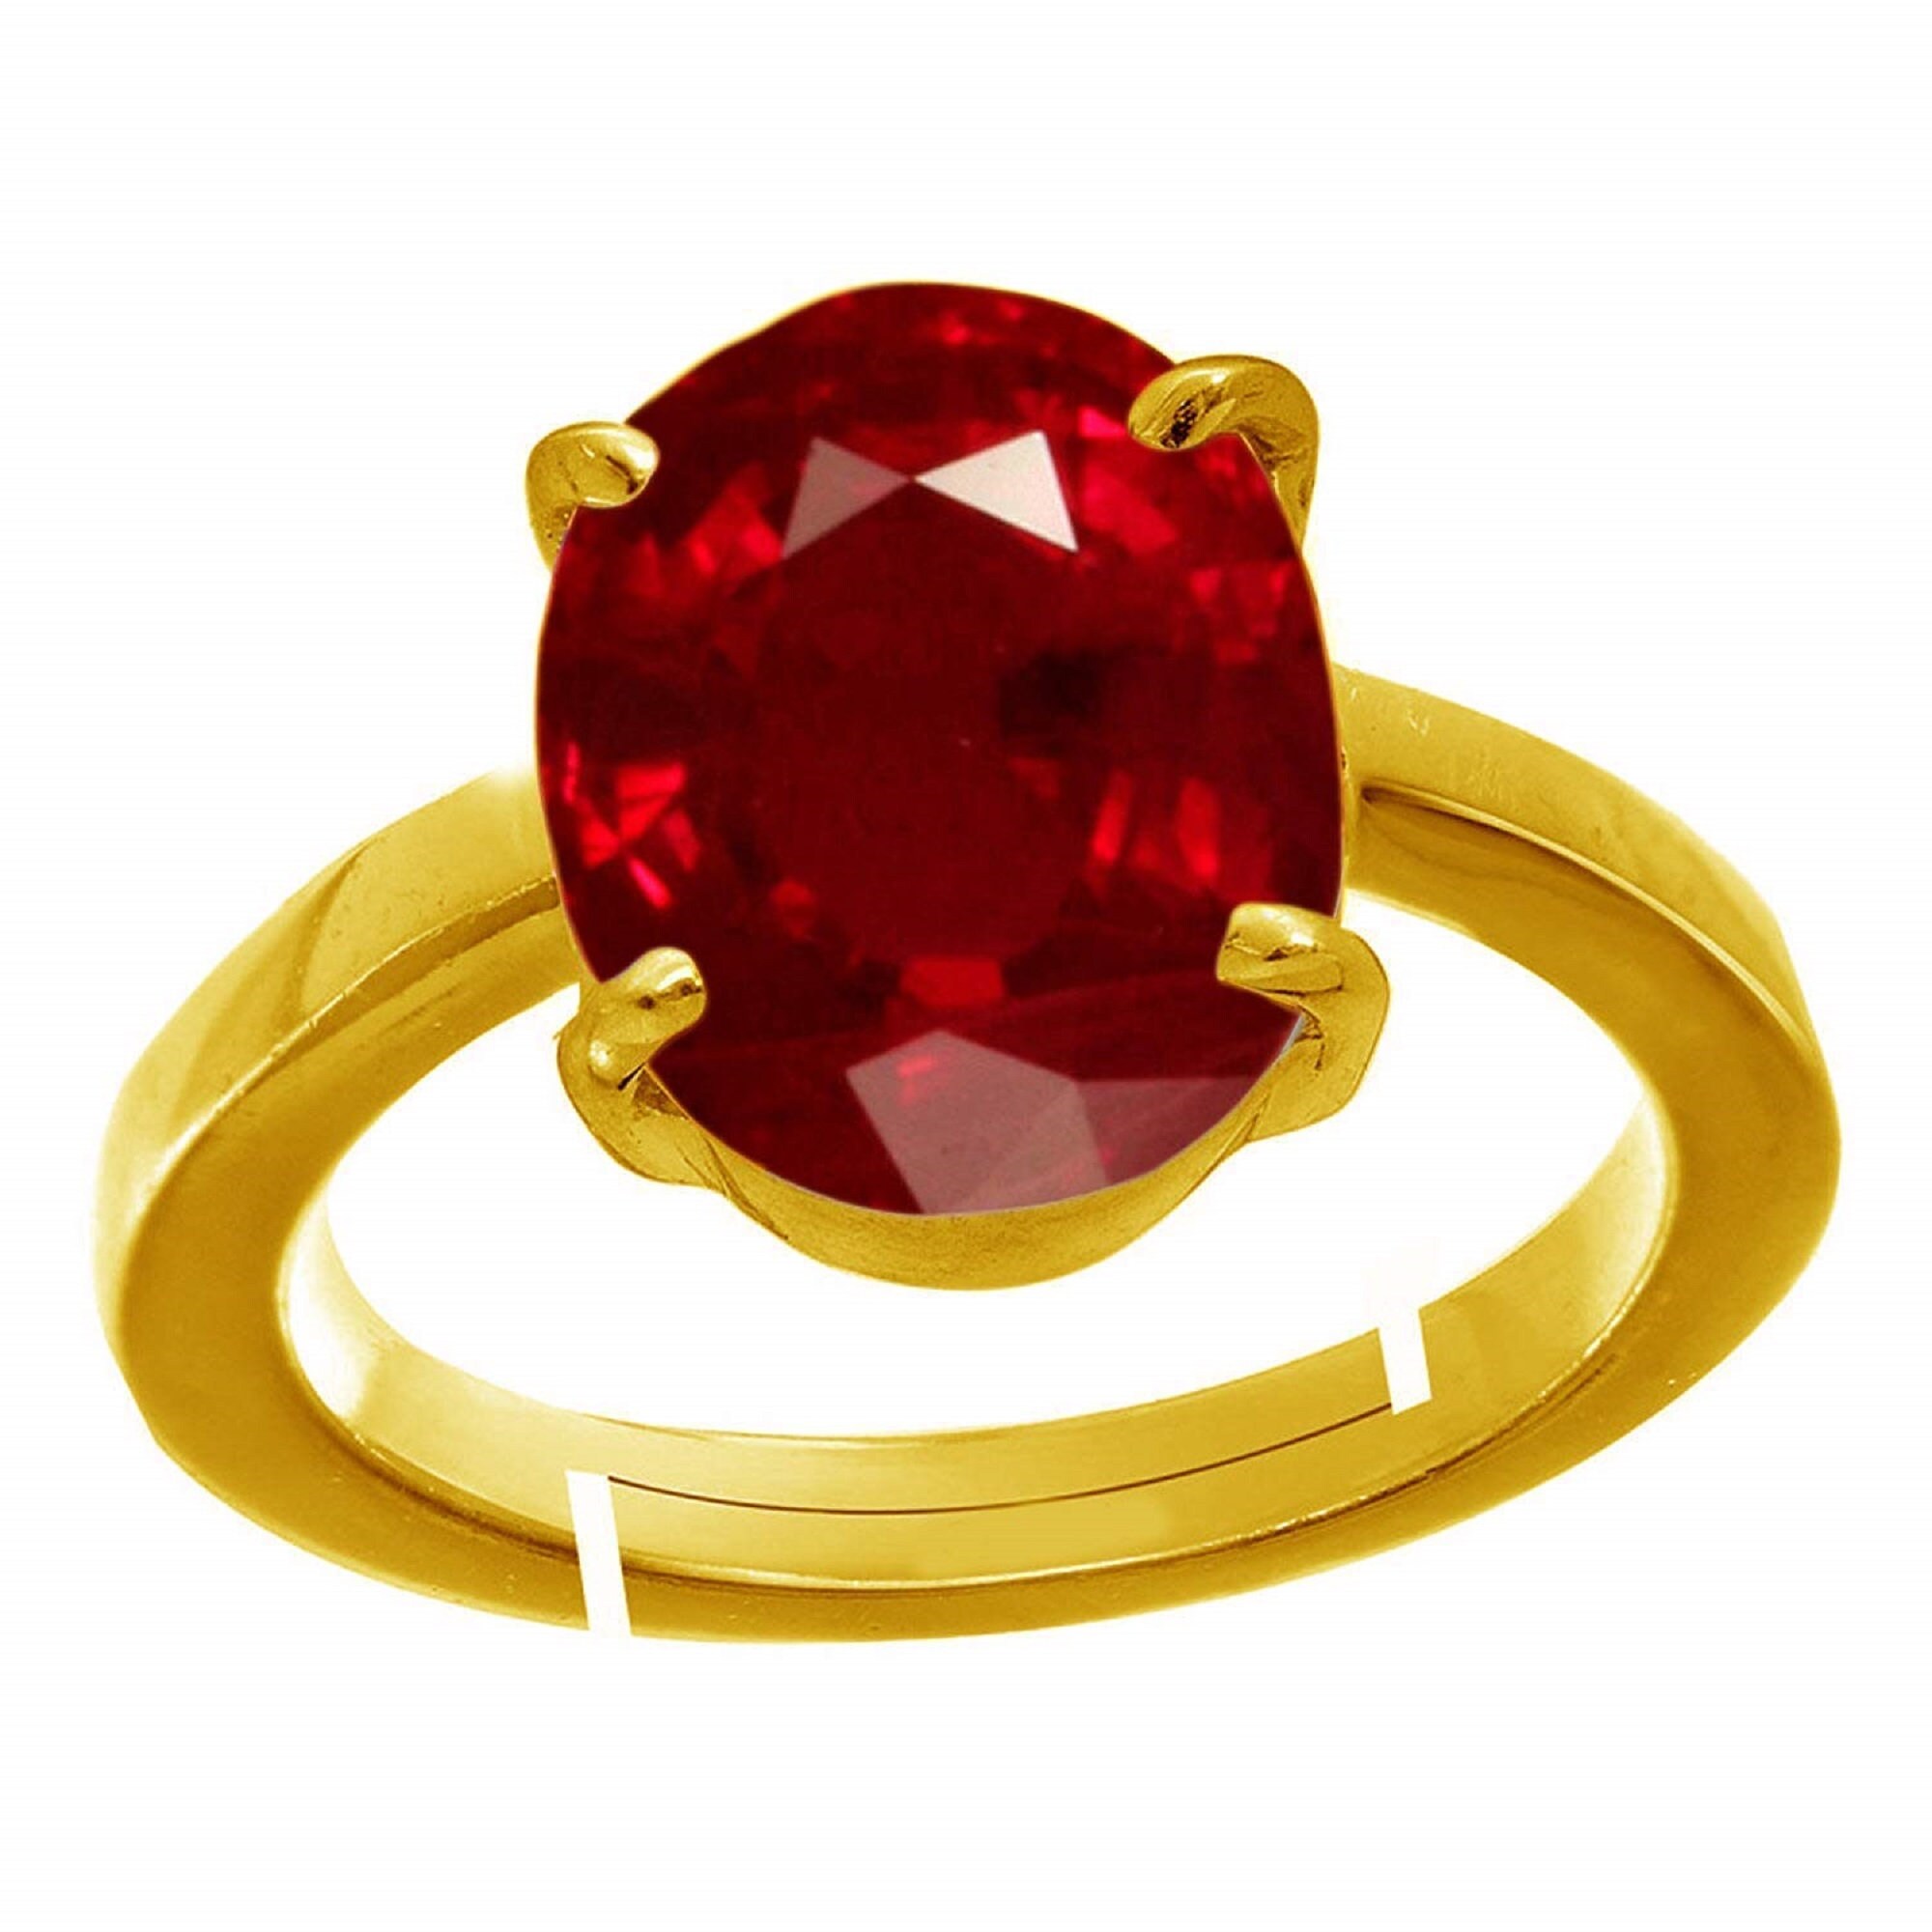 Natural Ruby (Manik) July month stone Gold Plated Adjustable Ring 2.25 –  Shaligrams